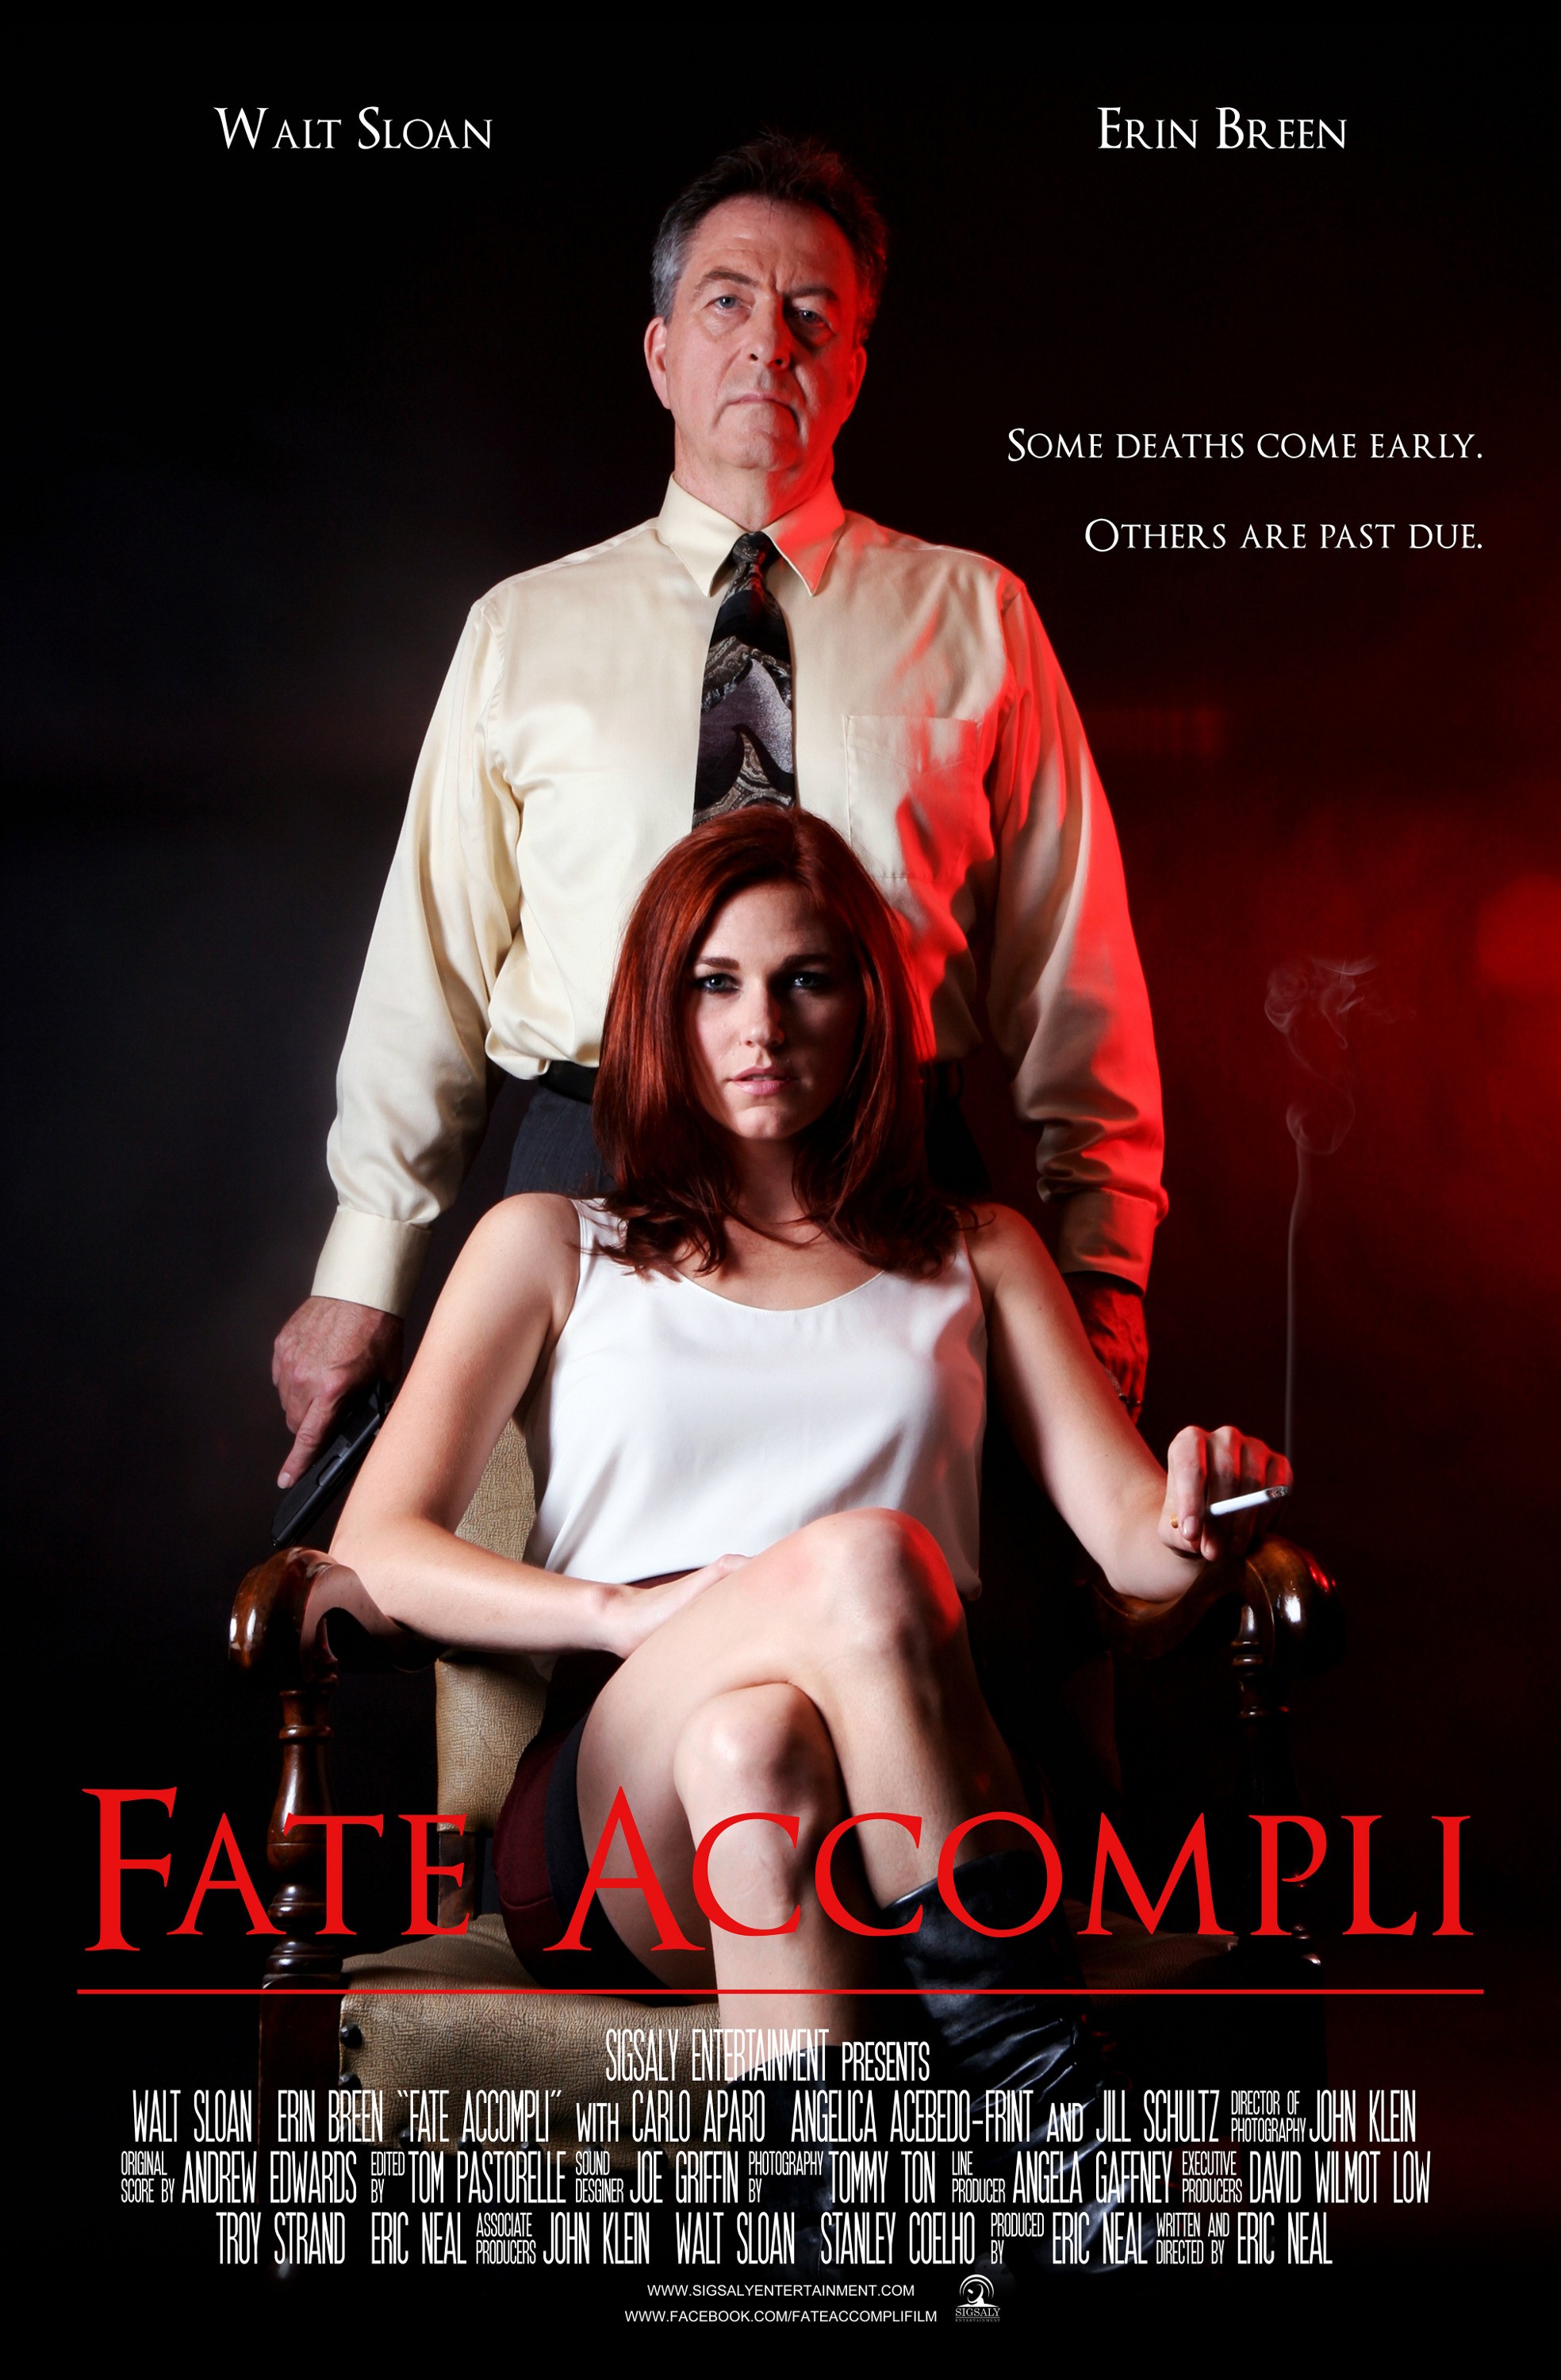 Mega Sized Movie Poster Image for Fate Accompli